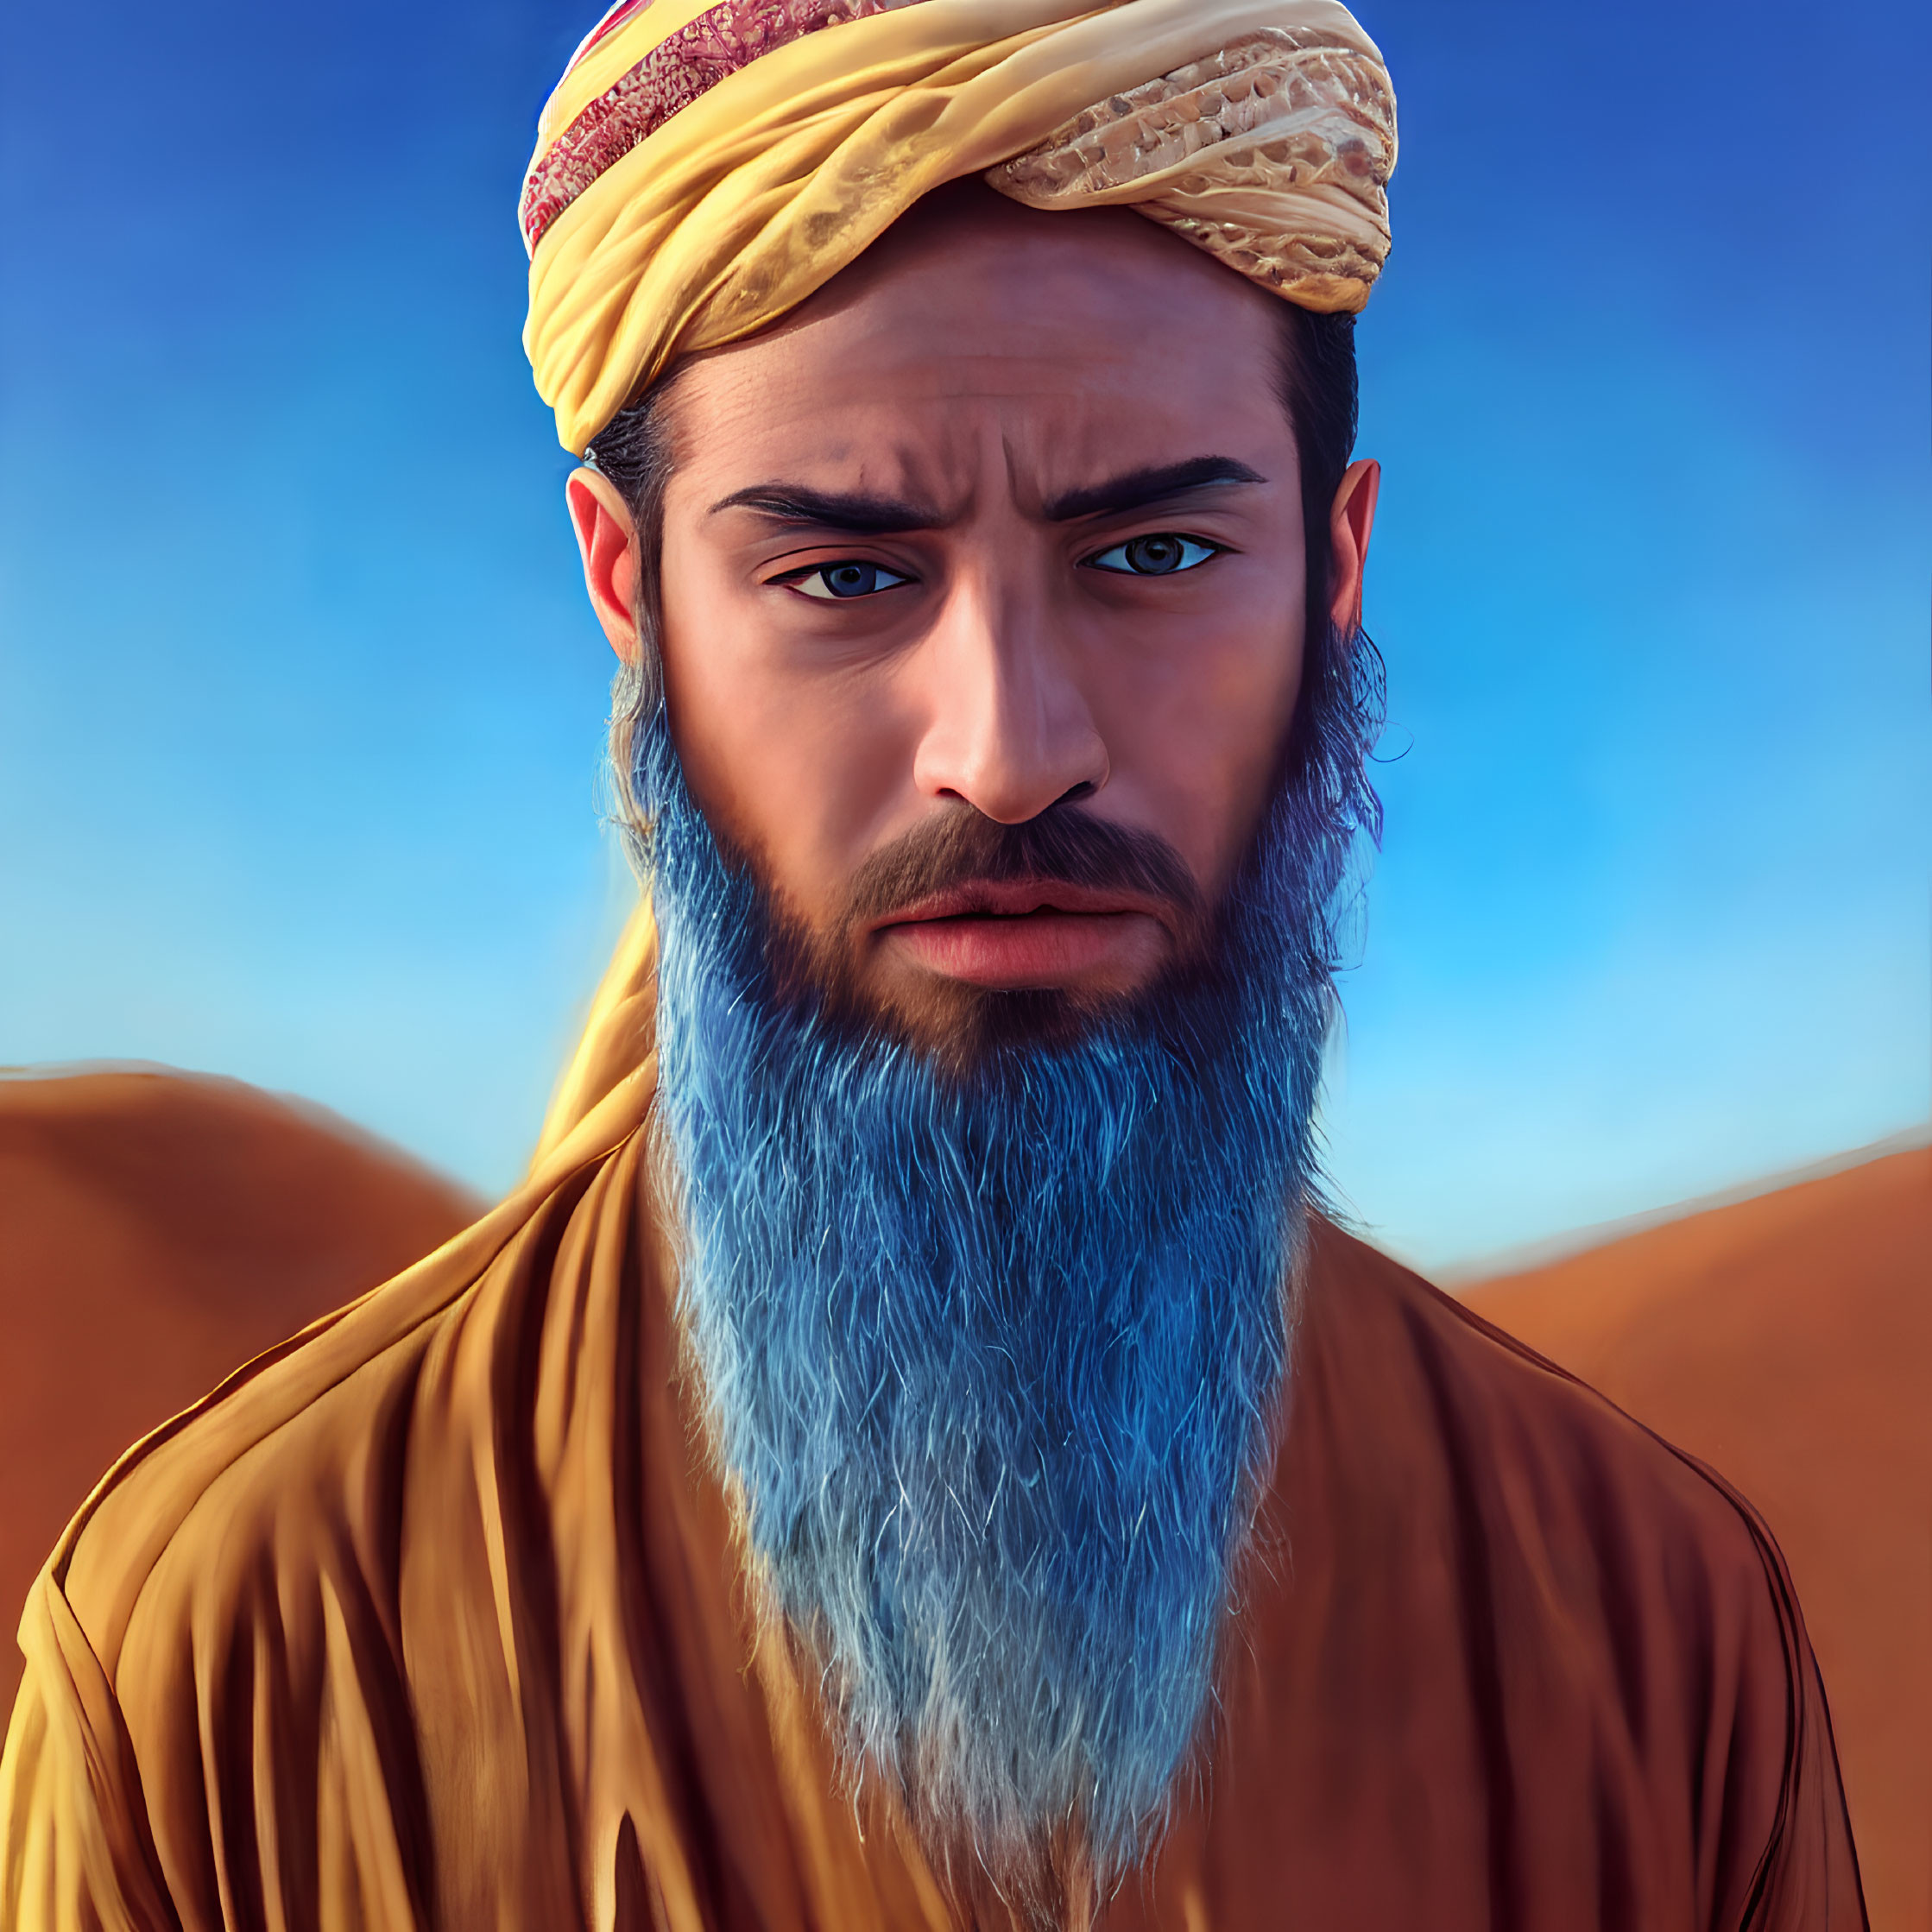 Man with Blue-Dyed Beard and Turban in Desert Portrait